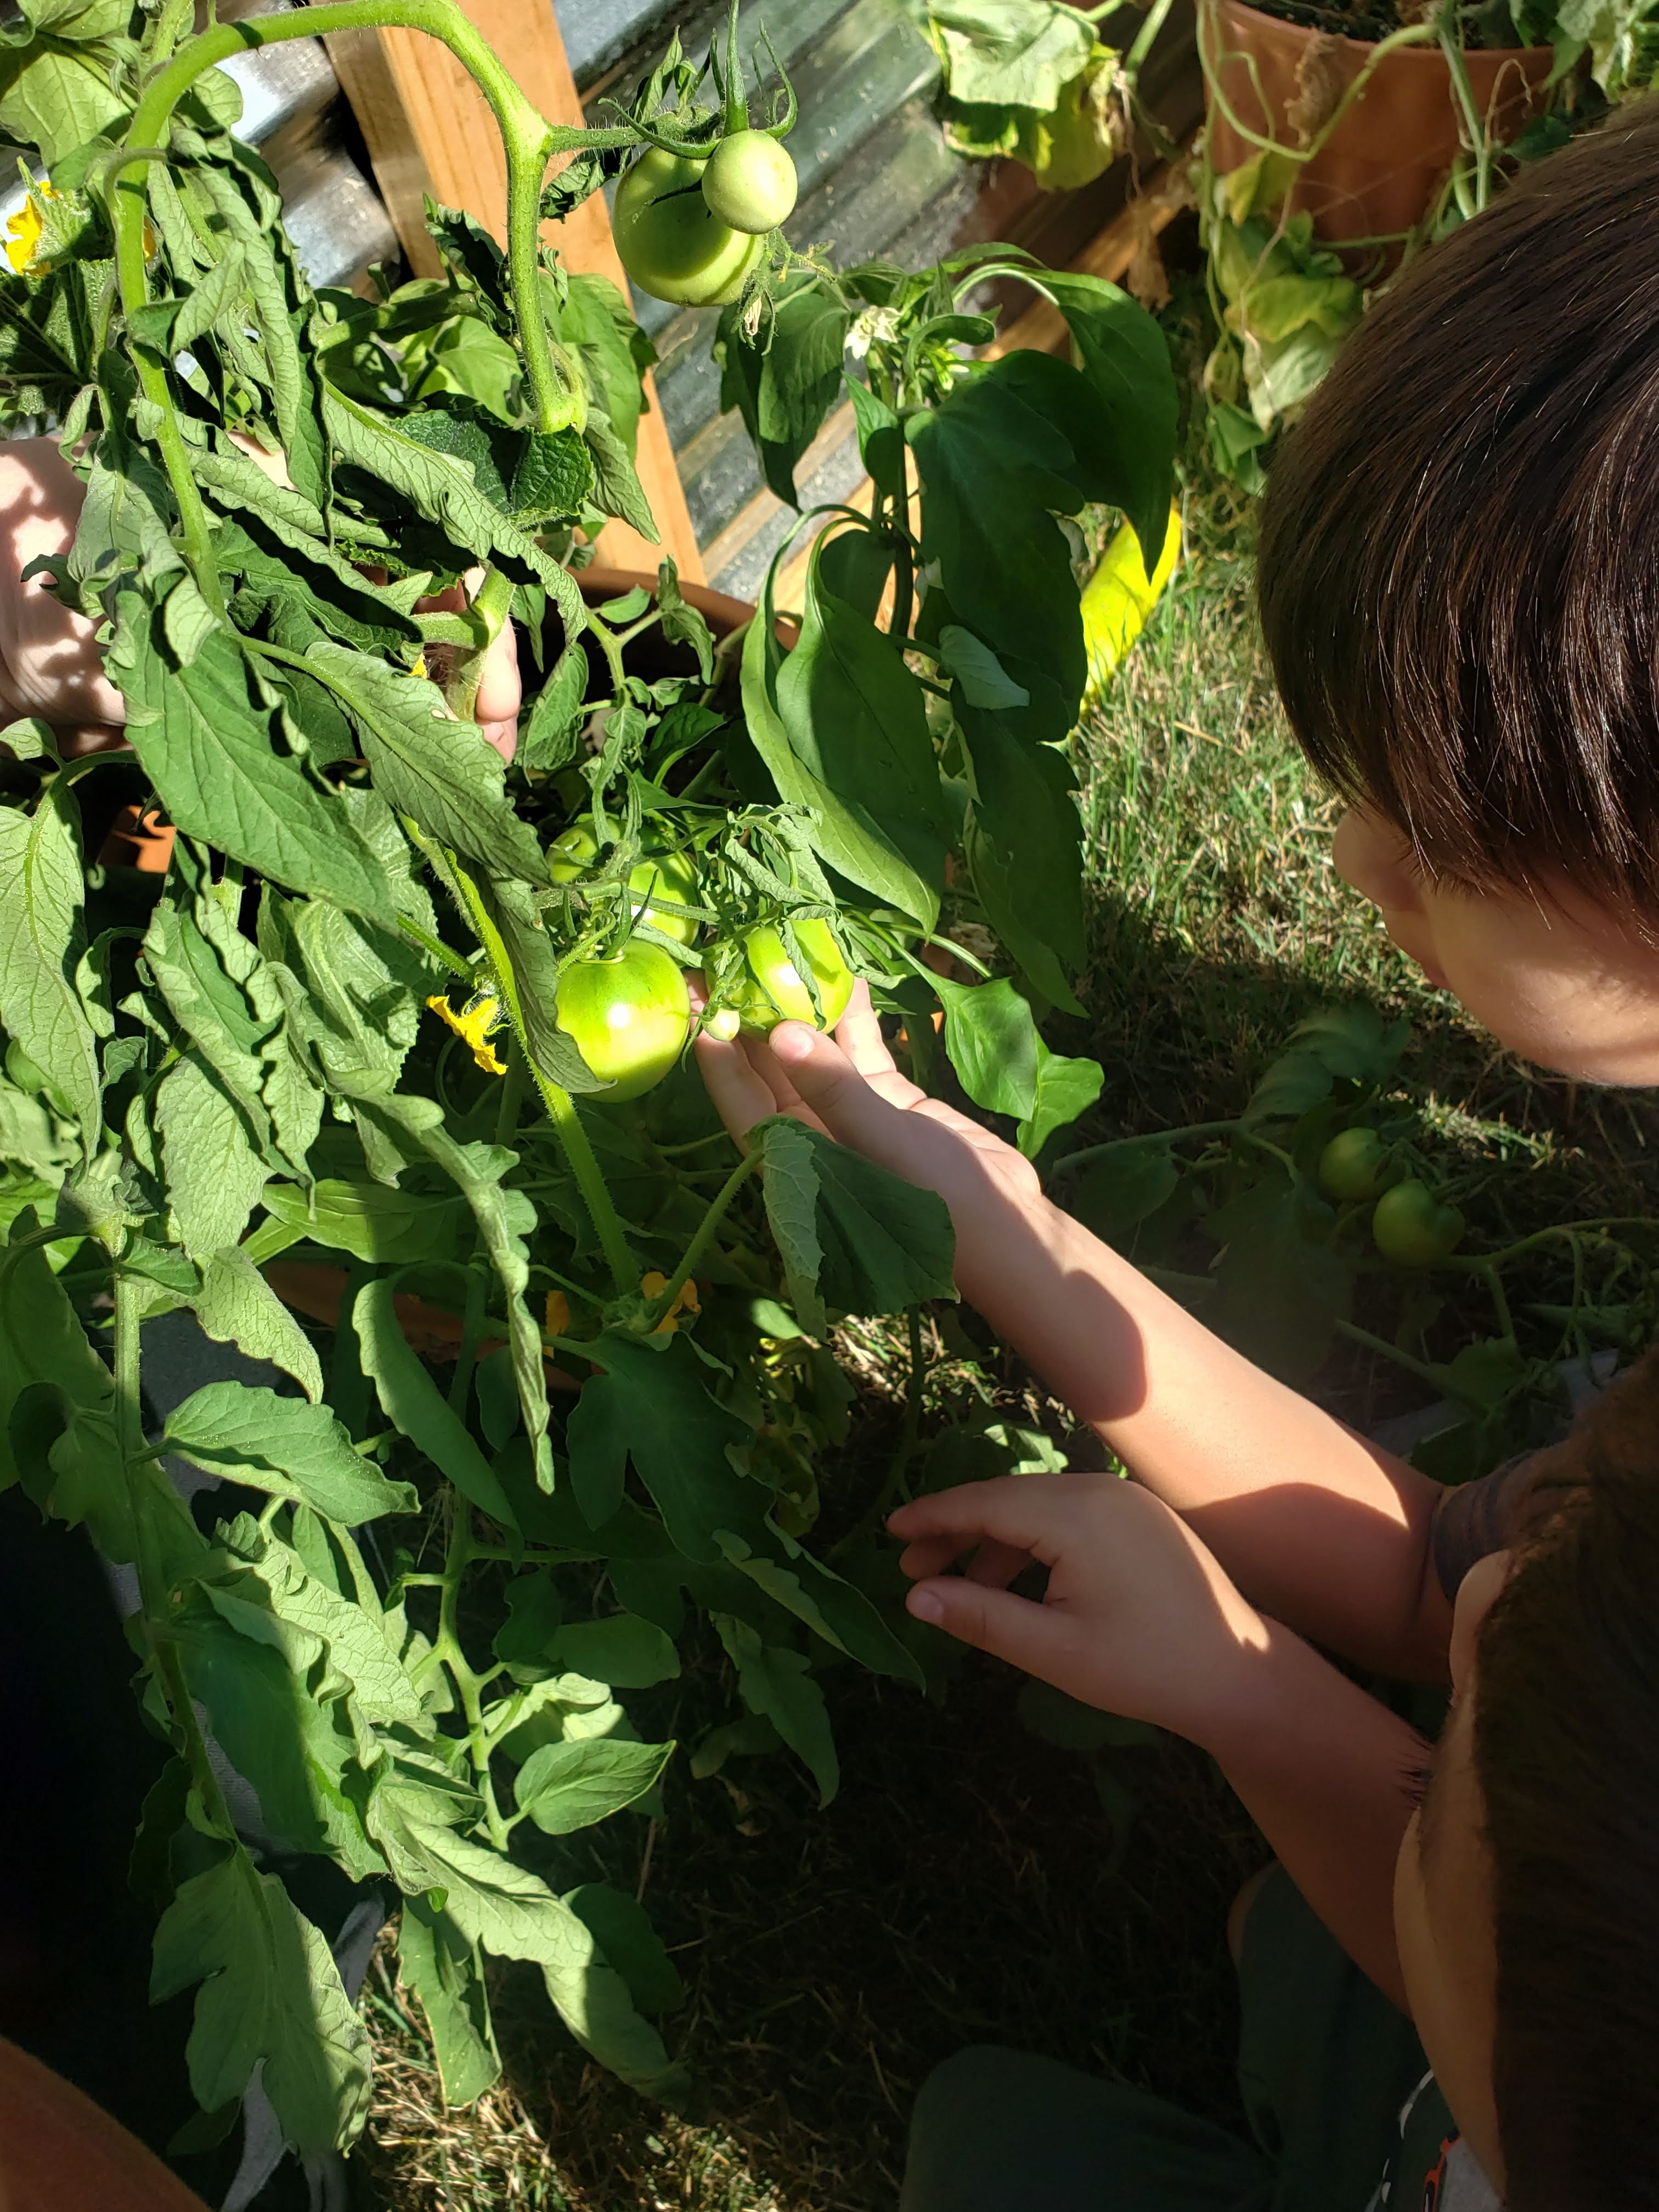 Checking out the tomatoes